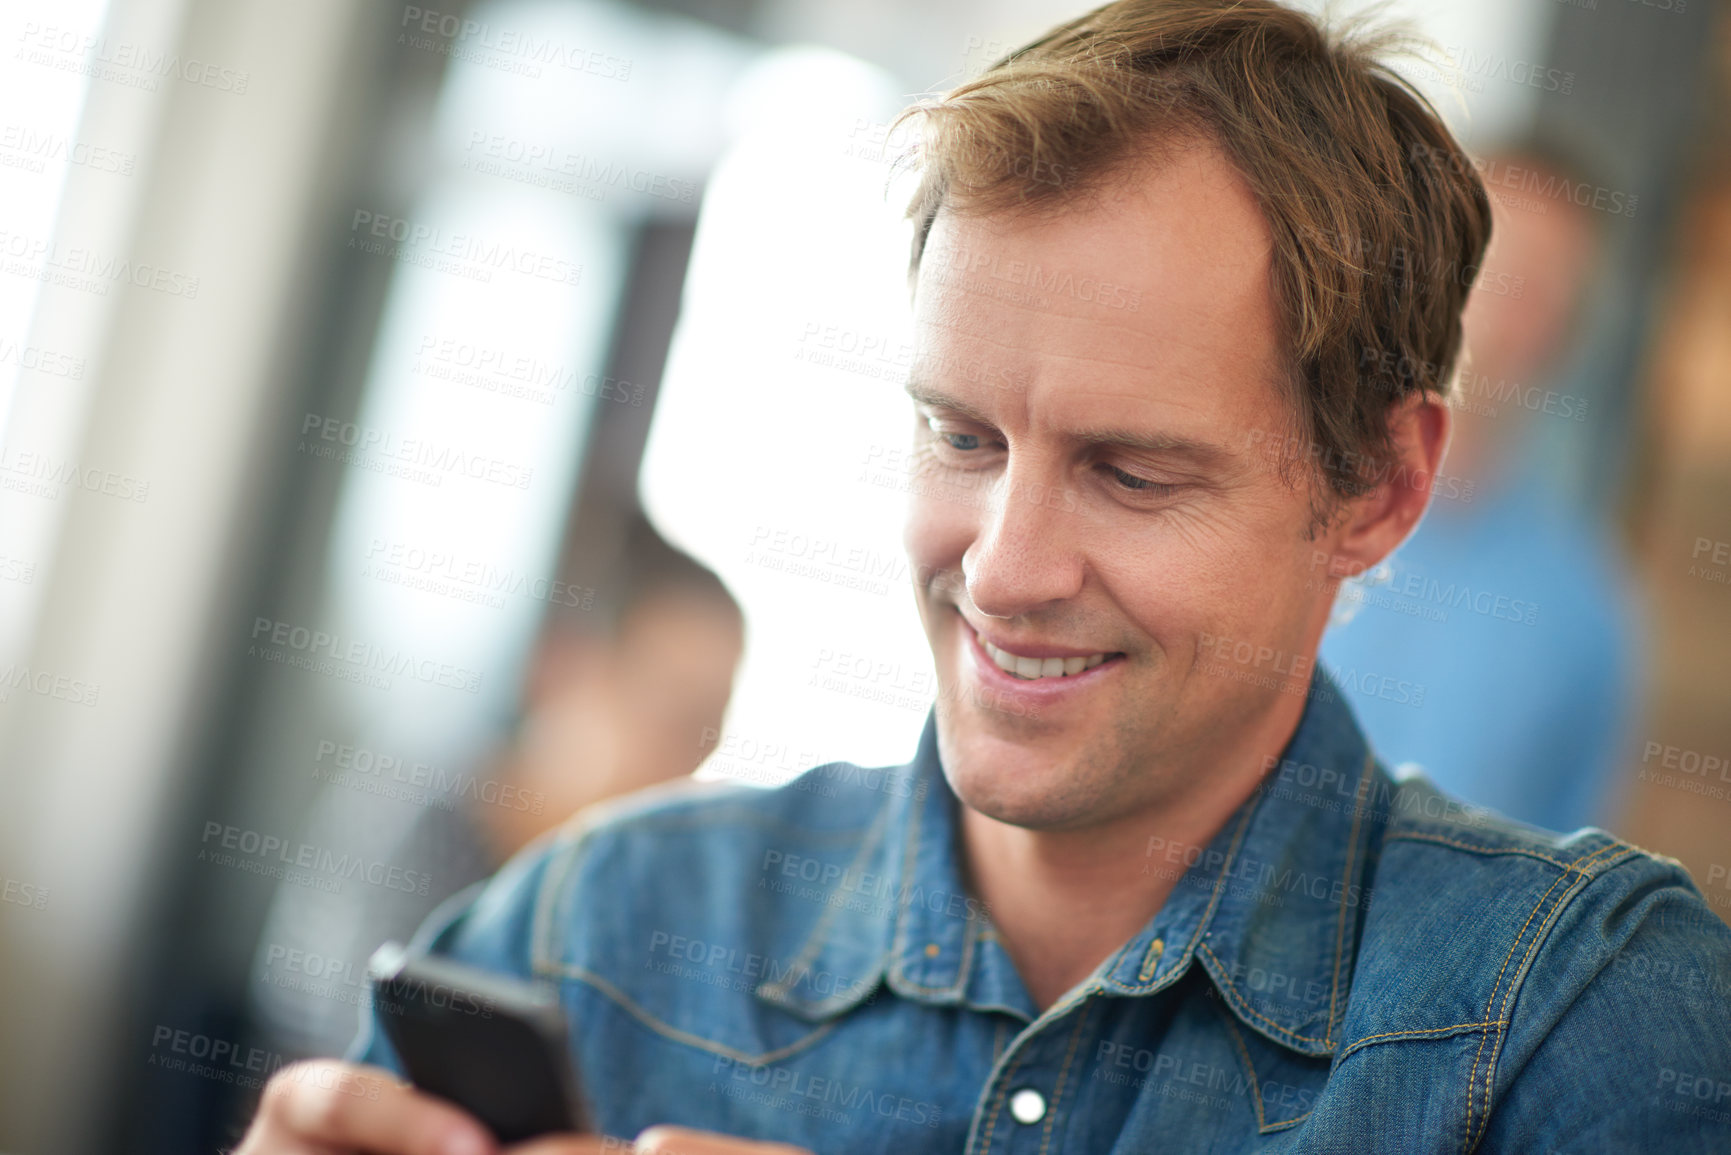 Buy stock photo Shot of a man sitting in an office messaging on a cellphone with colleagues in the background